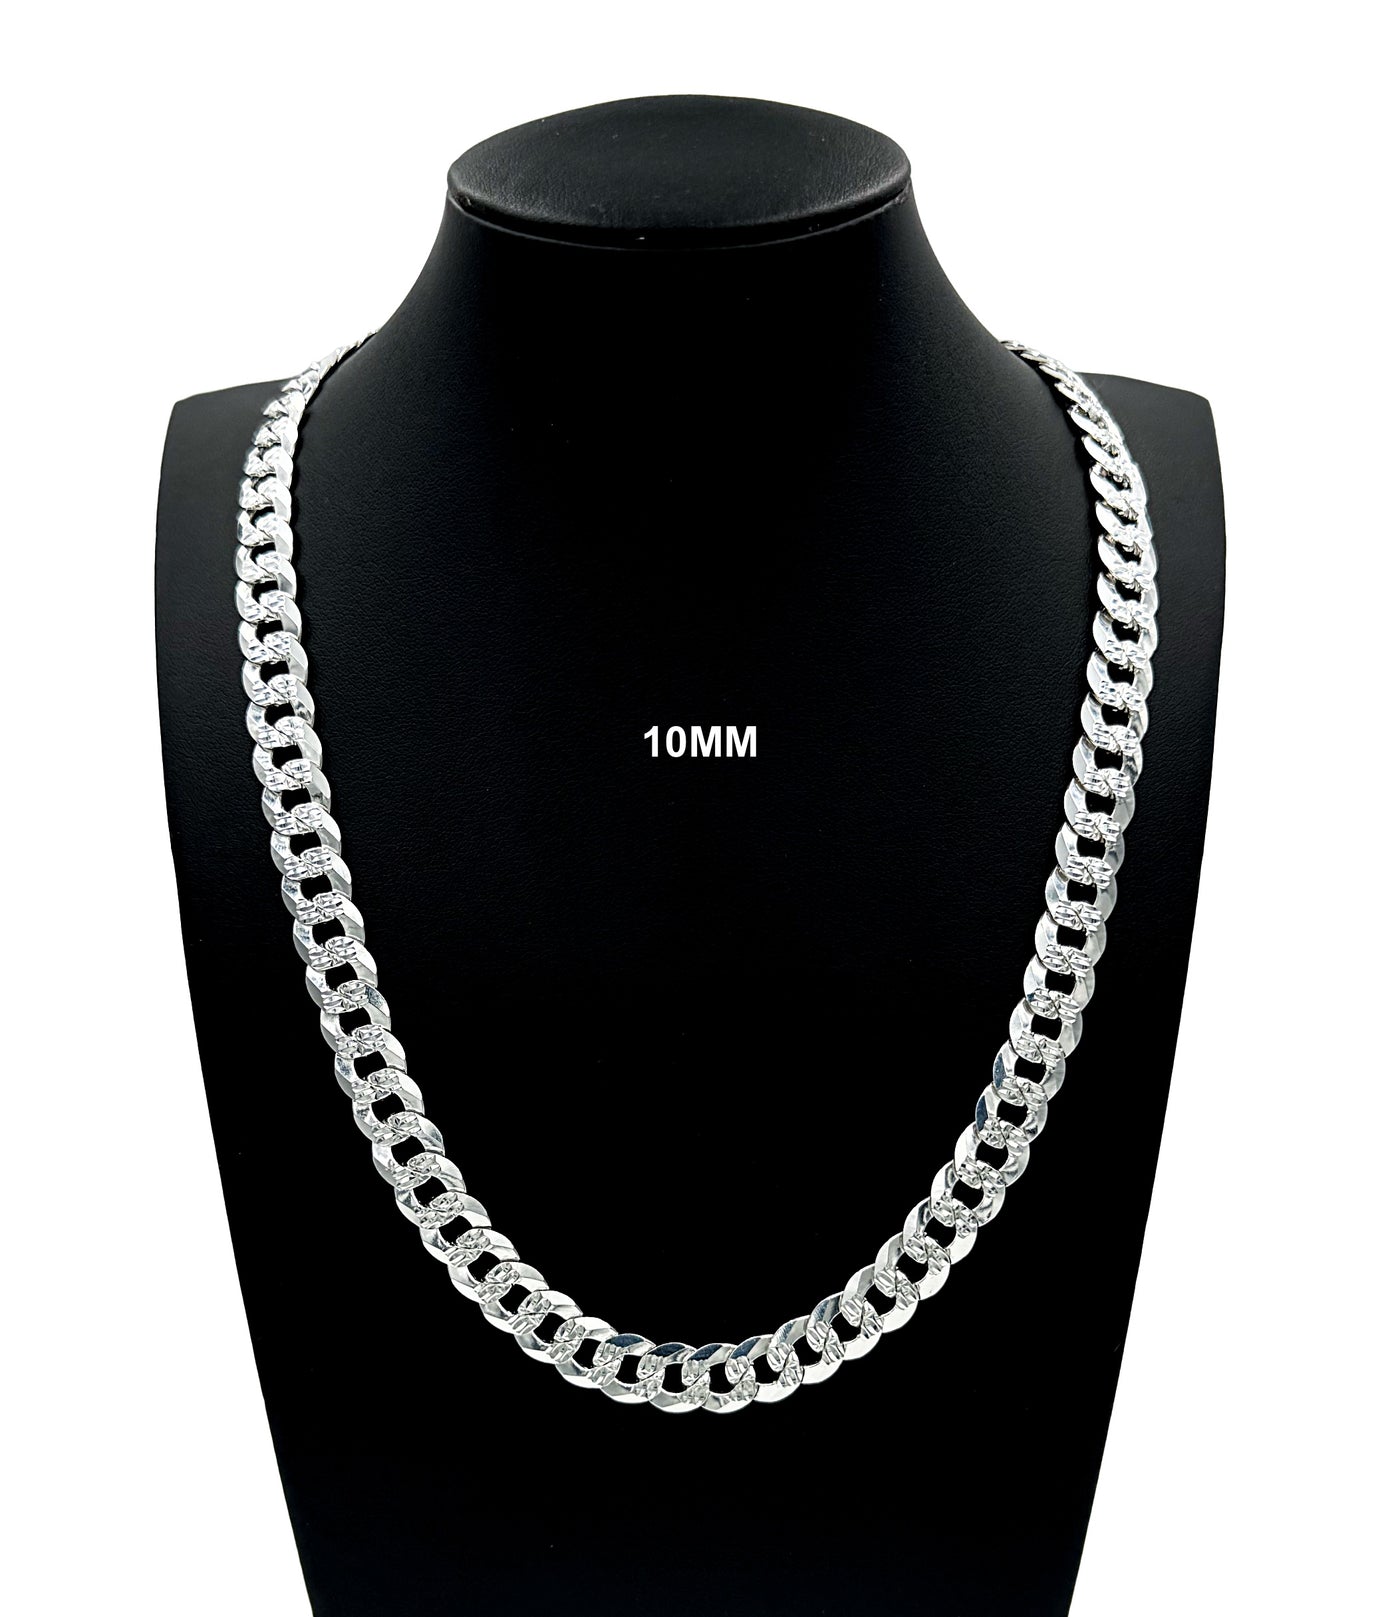 10MM Solid 925 Sterling Silver Diamond Cut Cuban Curb Chain Necklace or Bracelet ITALY